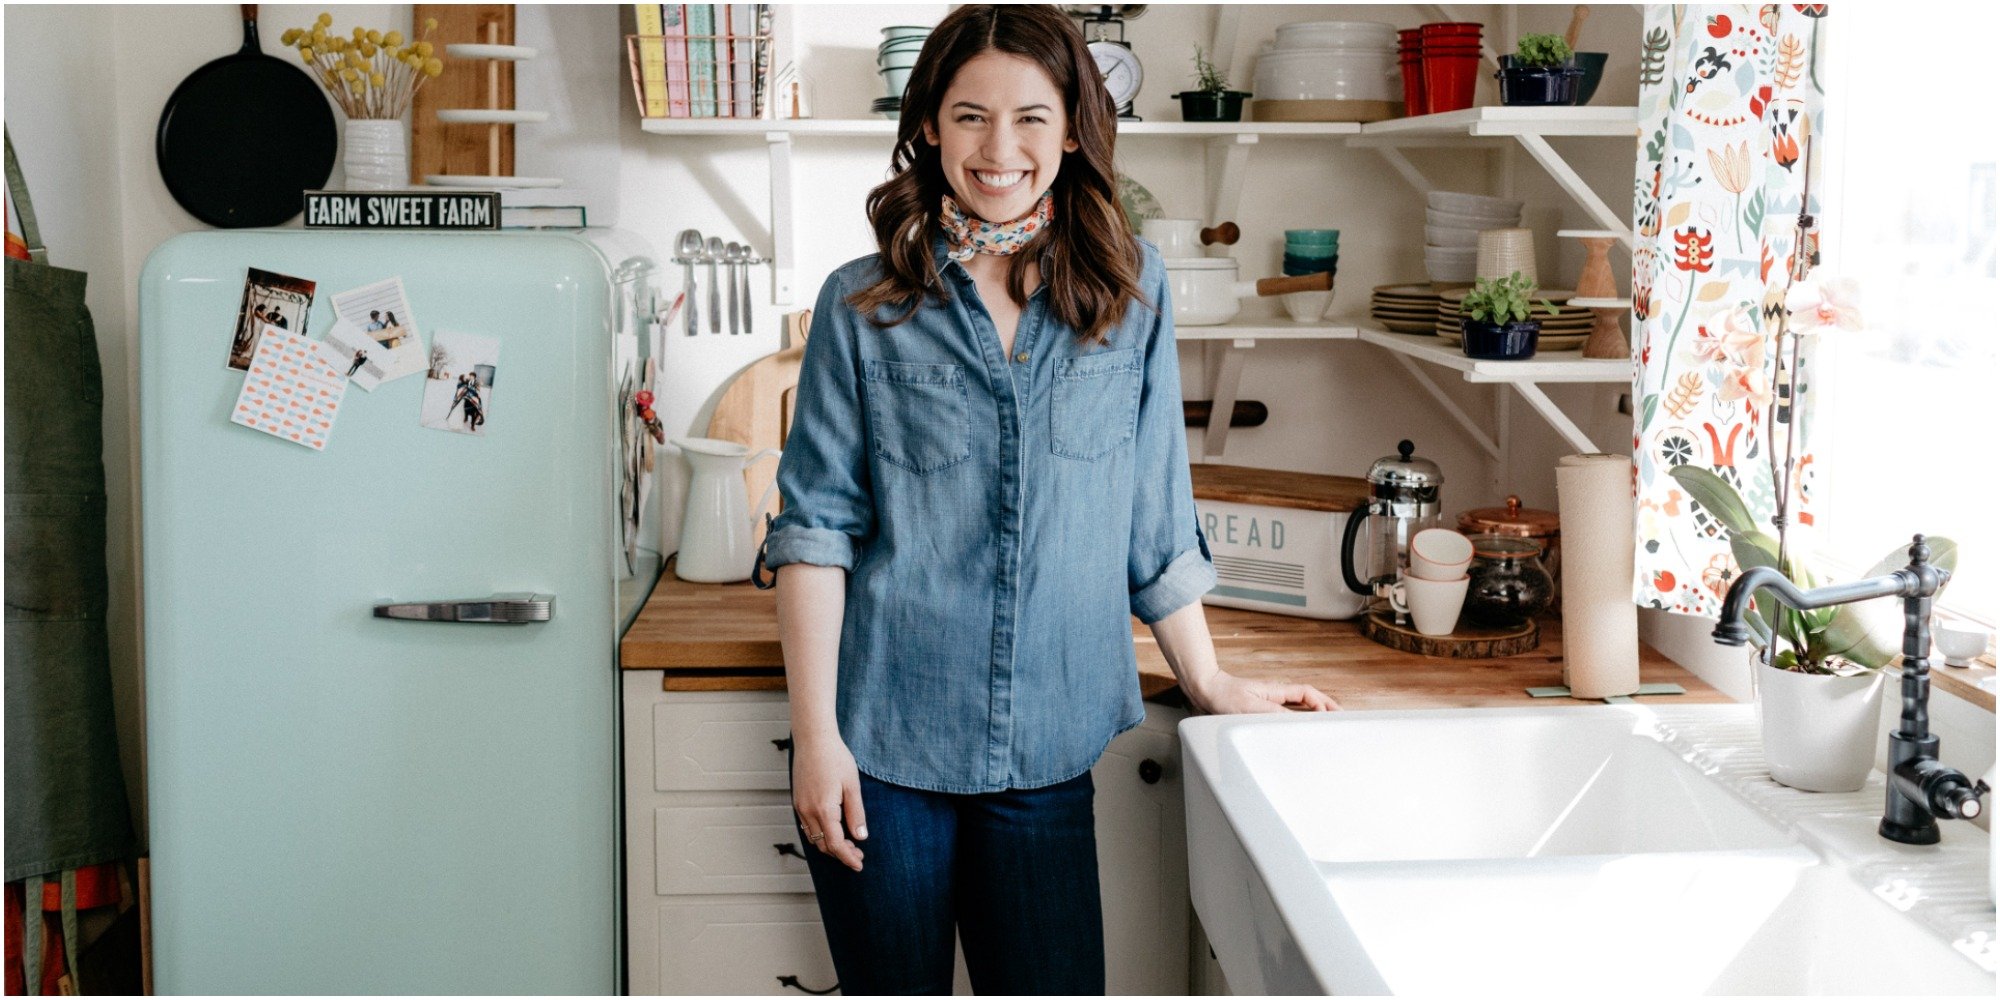 Molly Yeh in a denim shirt in her home kitchen.